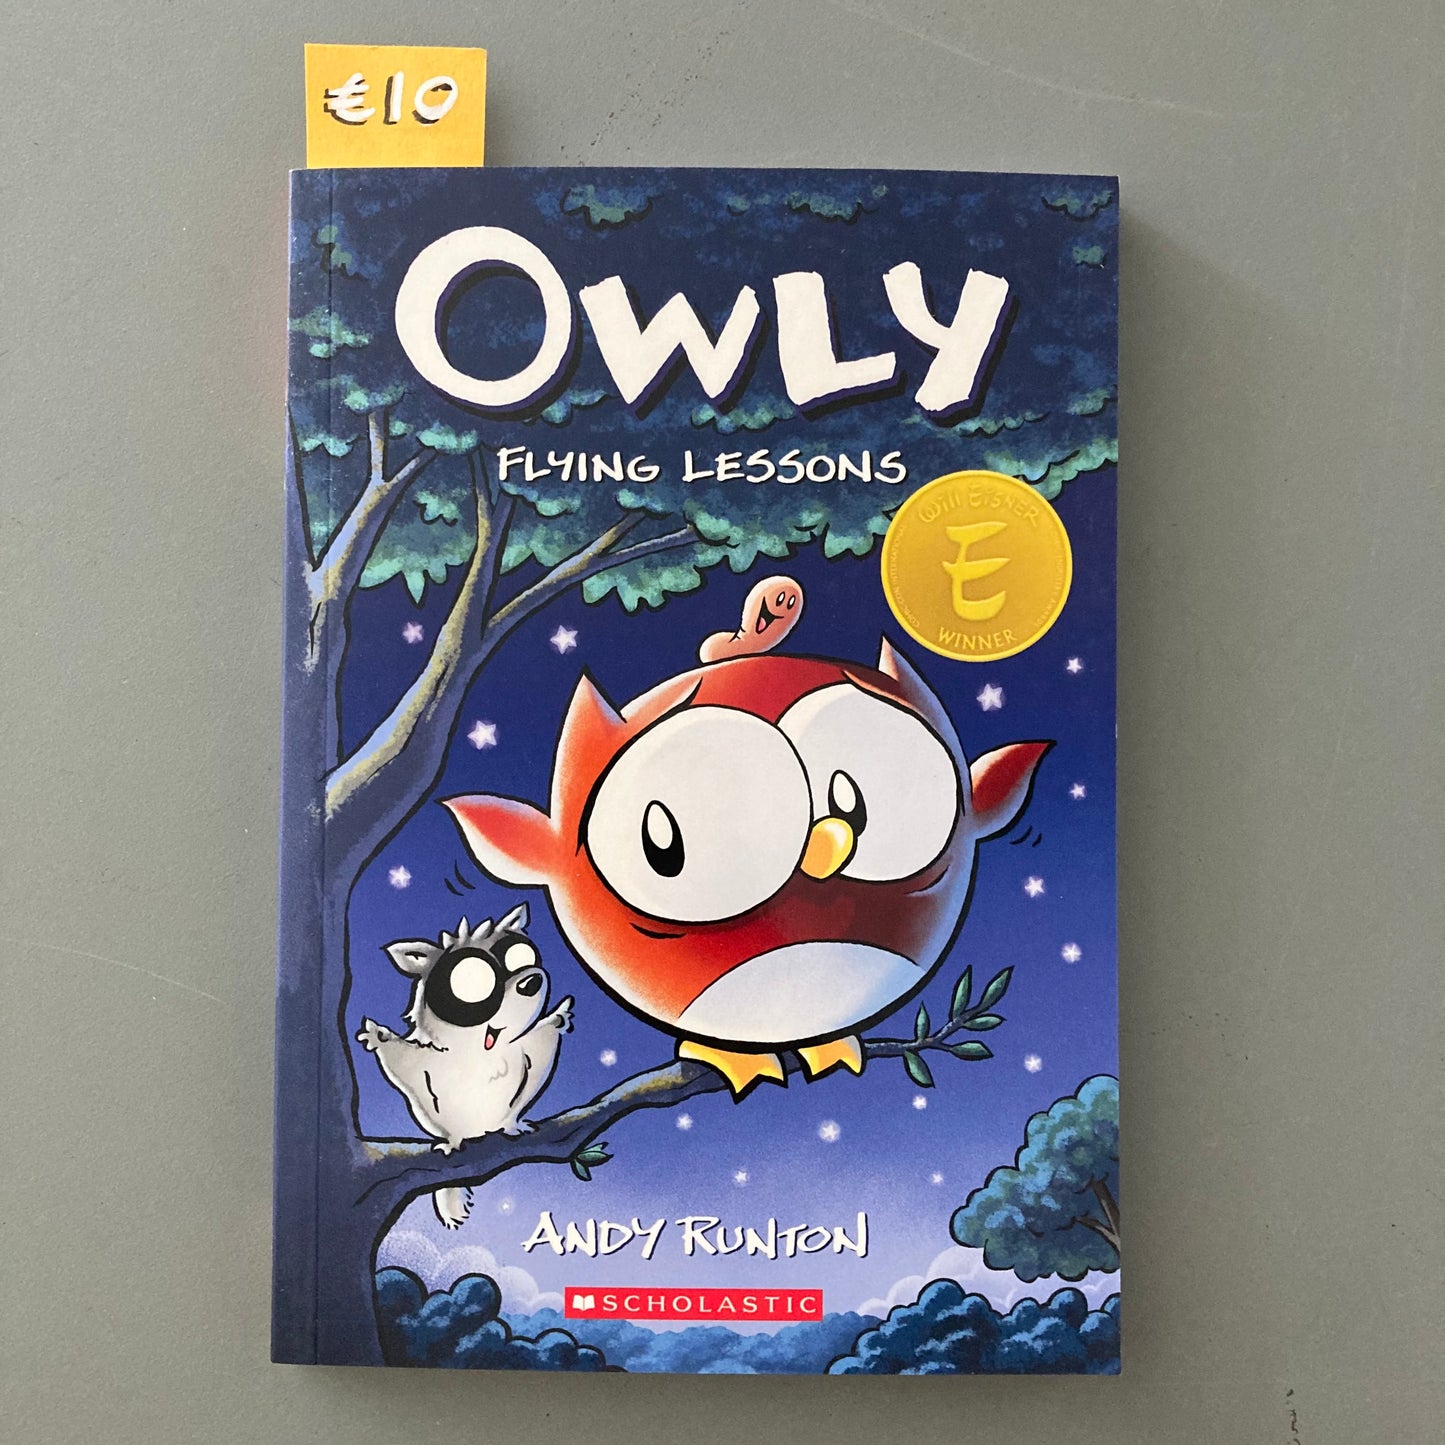 Owly: Flying Lessons